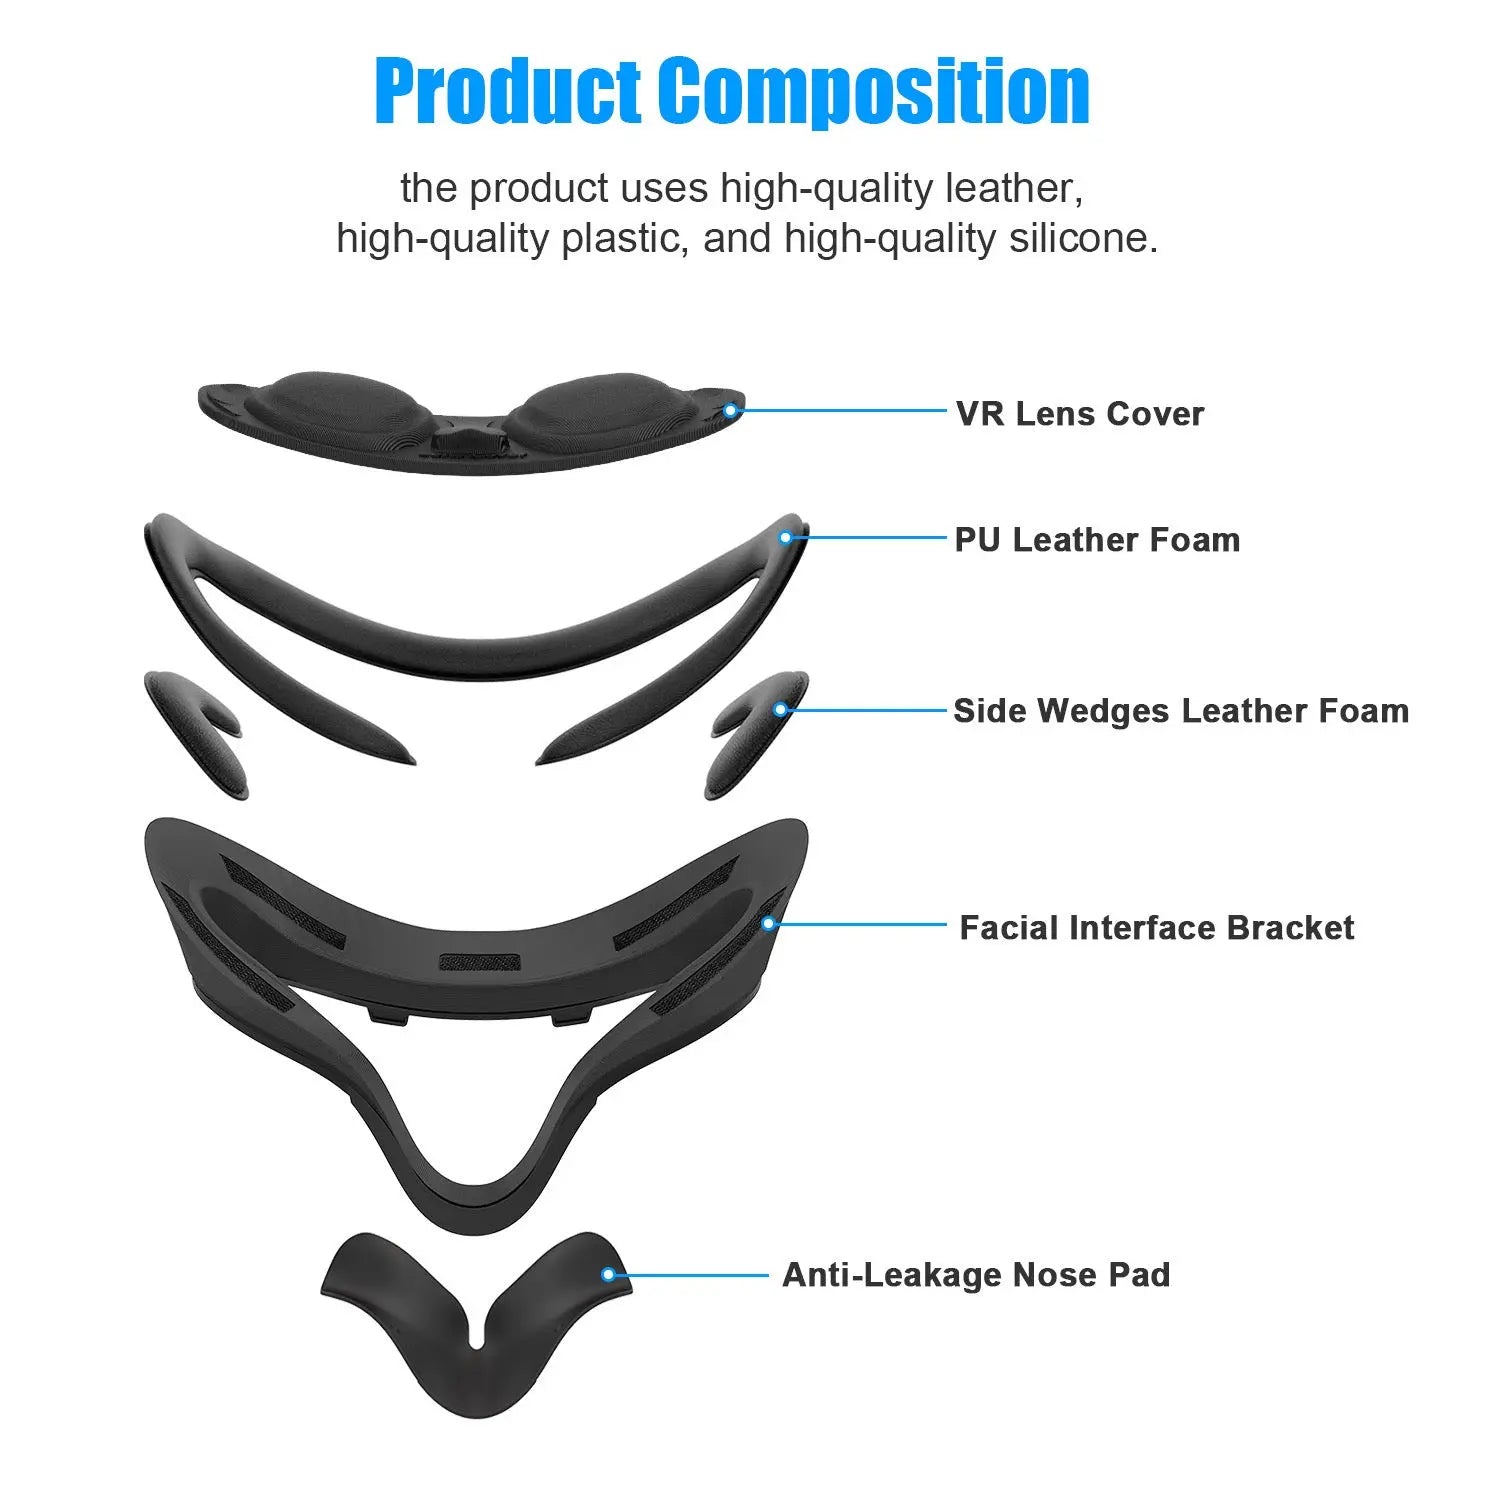 7-in-1 Facial Inteface for Quest 1 AMVRSHOP